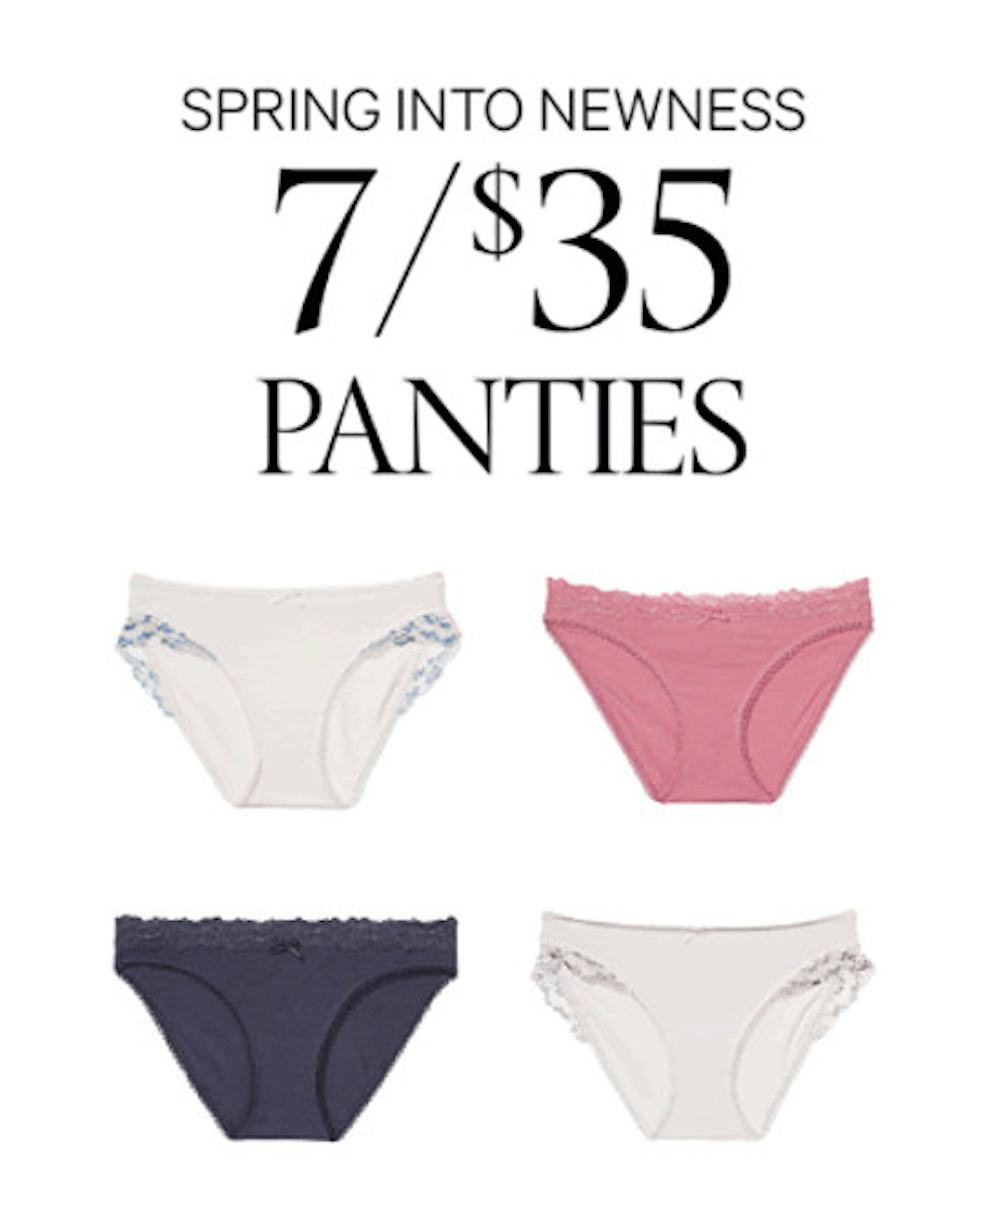 Today 12/1 Only! 10 For $35 Panties at Victoria's Secret - Deal